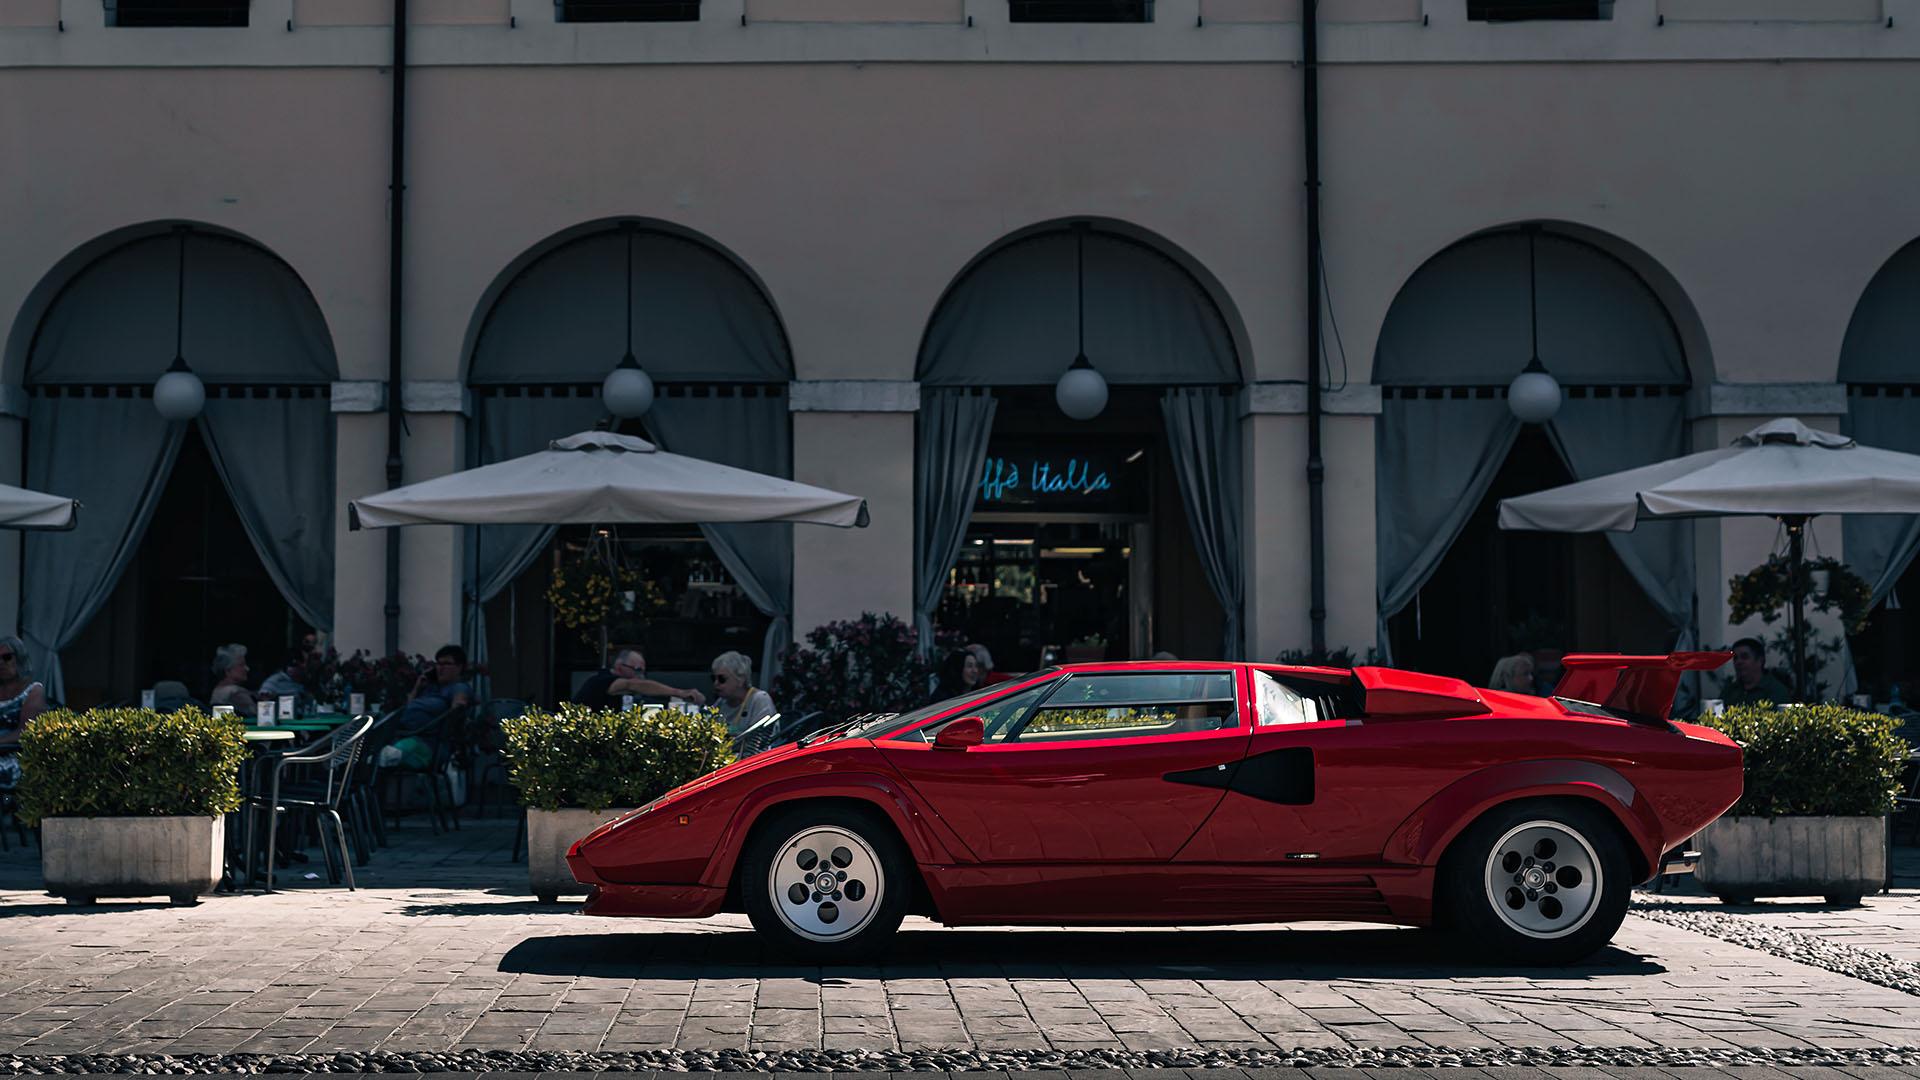 Countach and lm002 v12 16